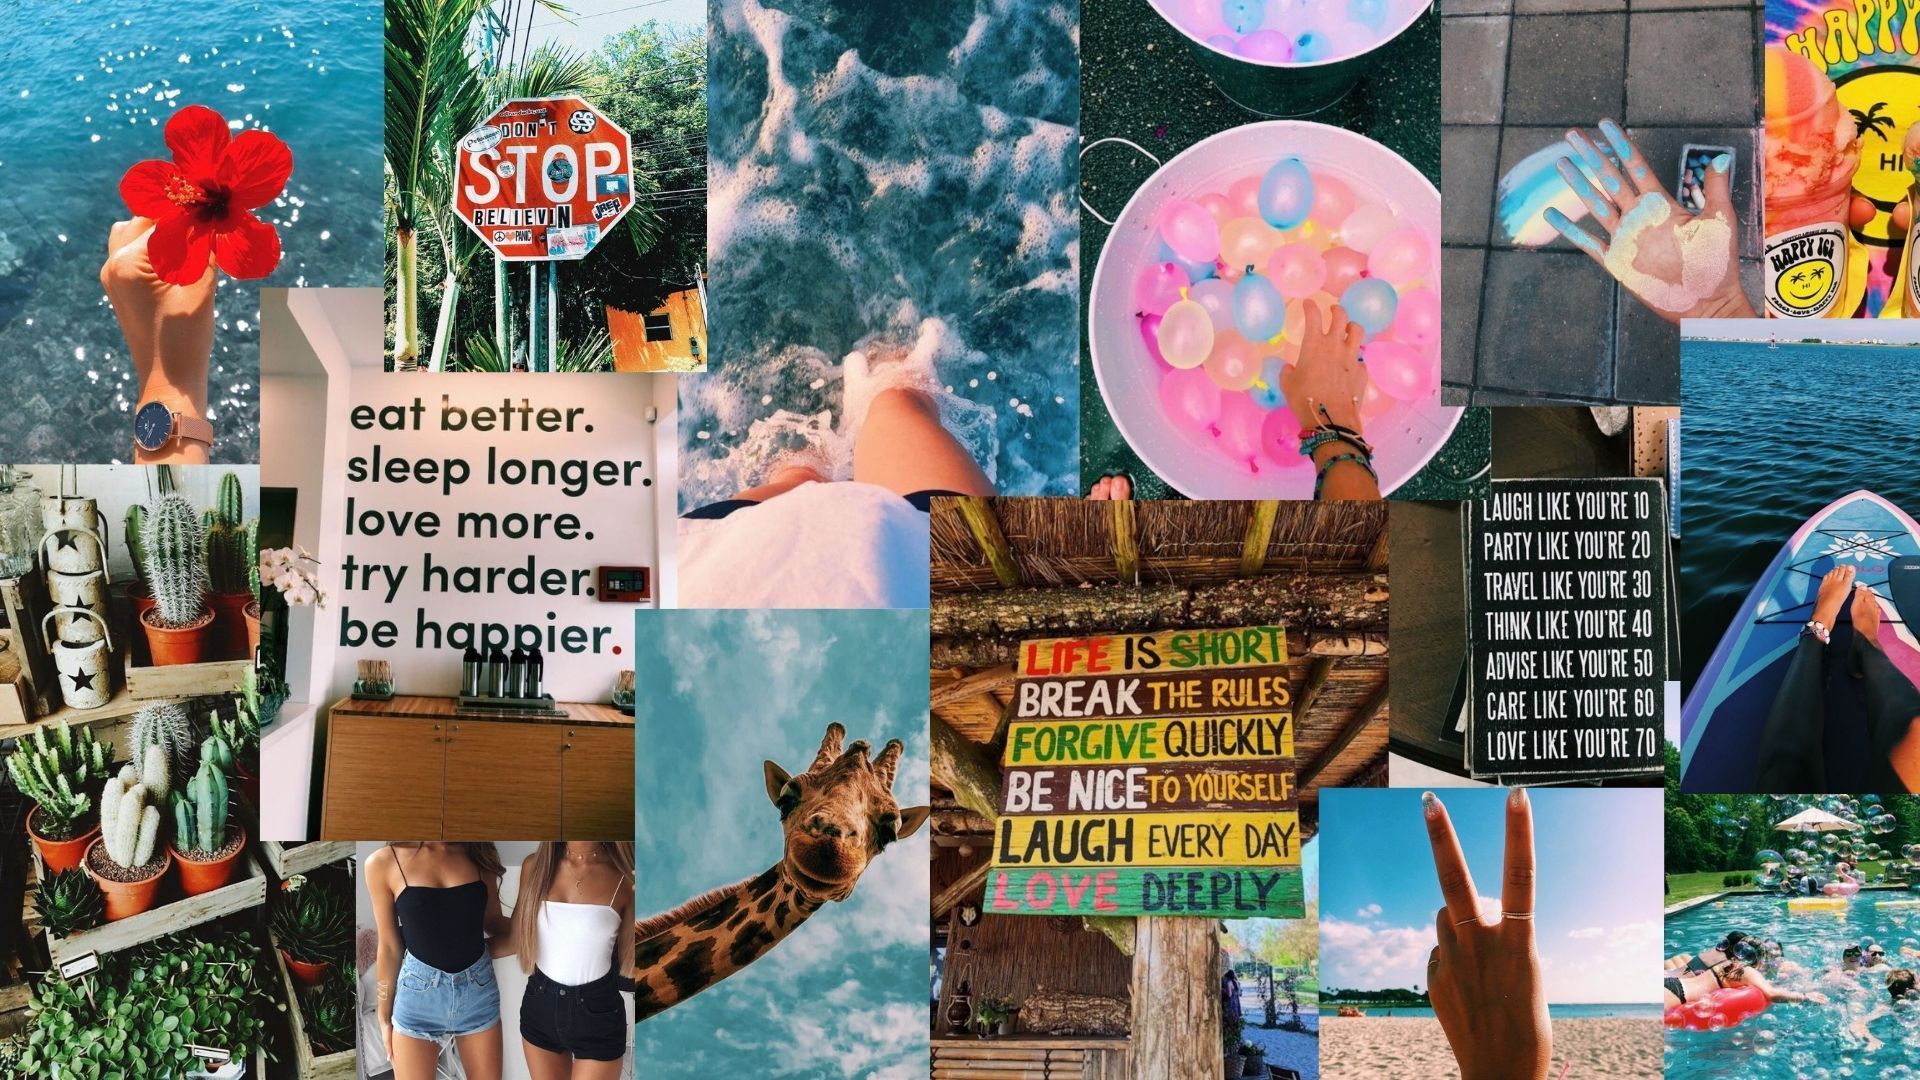 Collage of images including a stop sign, a beach, a giraffe, and a cactus. - Summer, VSCO, Hawaii